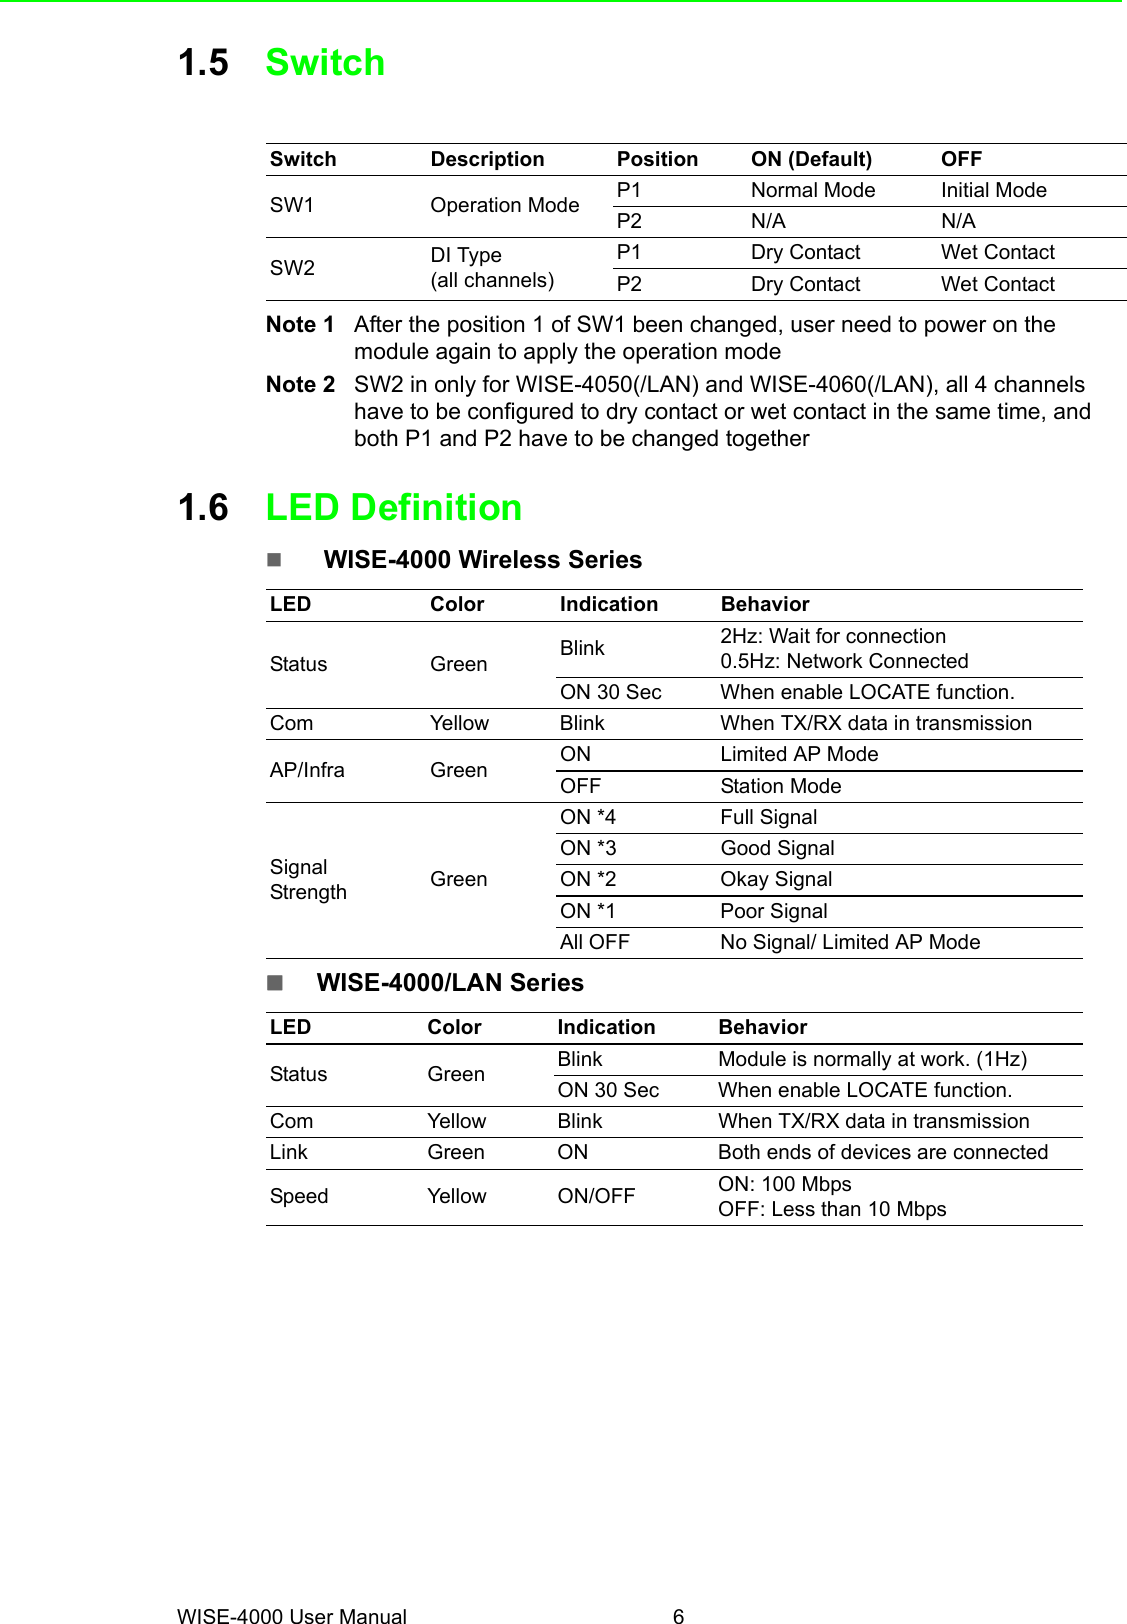 WISE-4000 User Manual 61.5 SwitchNote 1 After the position 1 of SW1 been changed, user need to power on the module again to apply the operation modeNote 2 SW2 in only for WISE-4050(/LAN) and WISE-4060(/LAN), all 4 channels have to be configured to dry contact or wet contact in the same time, and both P1 and P2 have to be changed together1.6 LED Definition WISE-4000 Wireless SeriesWISE-4000/LAN SeriesSwitch Description Position ON (Default) OFFSW1 Operation Mode P1 Normal Mode Initial ModeP2 N/A N/ASW2 DI Type(all channels)P1 Dry Contact Wet ContactP2 Dry Contact Wet ContactLED Color Indication BehaviorStatus Green Blink 2Hz: Wait for connection0.5Hz: Network ConnectedON 30 Sec When enable LOCATE function.Com Yellow Blink When TX/RX data in transmissionAP/Infra Green ON Limited AP ModeOFF Station ModeSignal Strength GreenON *4 Full SignalON *3 Good SignalON *2 Okay SignalON *1 Poor SignalAll OFF No Signal/ Limited AP ModeLED Color Indication BehaviorStatus Green Blink Module is normally at work. (1Hz)ON 30 Sec When enable LOCATE function.Com Yellow Blink When TX/RX data in transmissionLink Green ON Both ends of devices are connectedSpeed Yellow ON/OFF ON: 100 MbpsOFF: Less than 10 Mbps